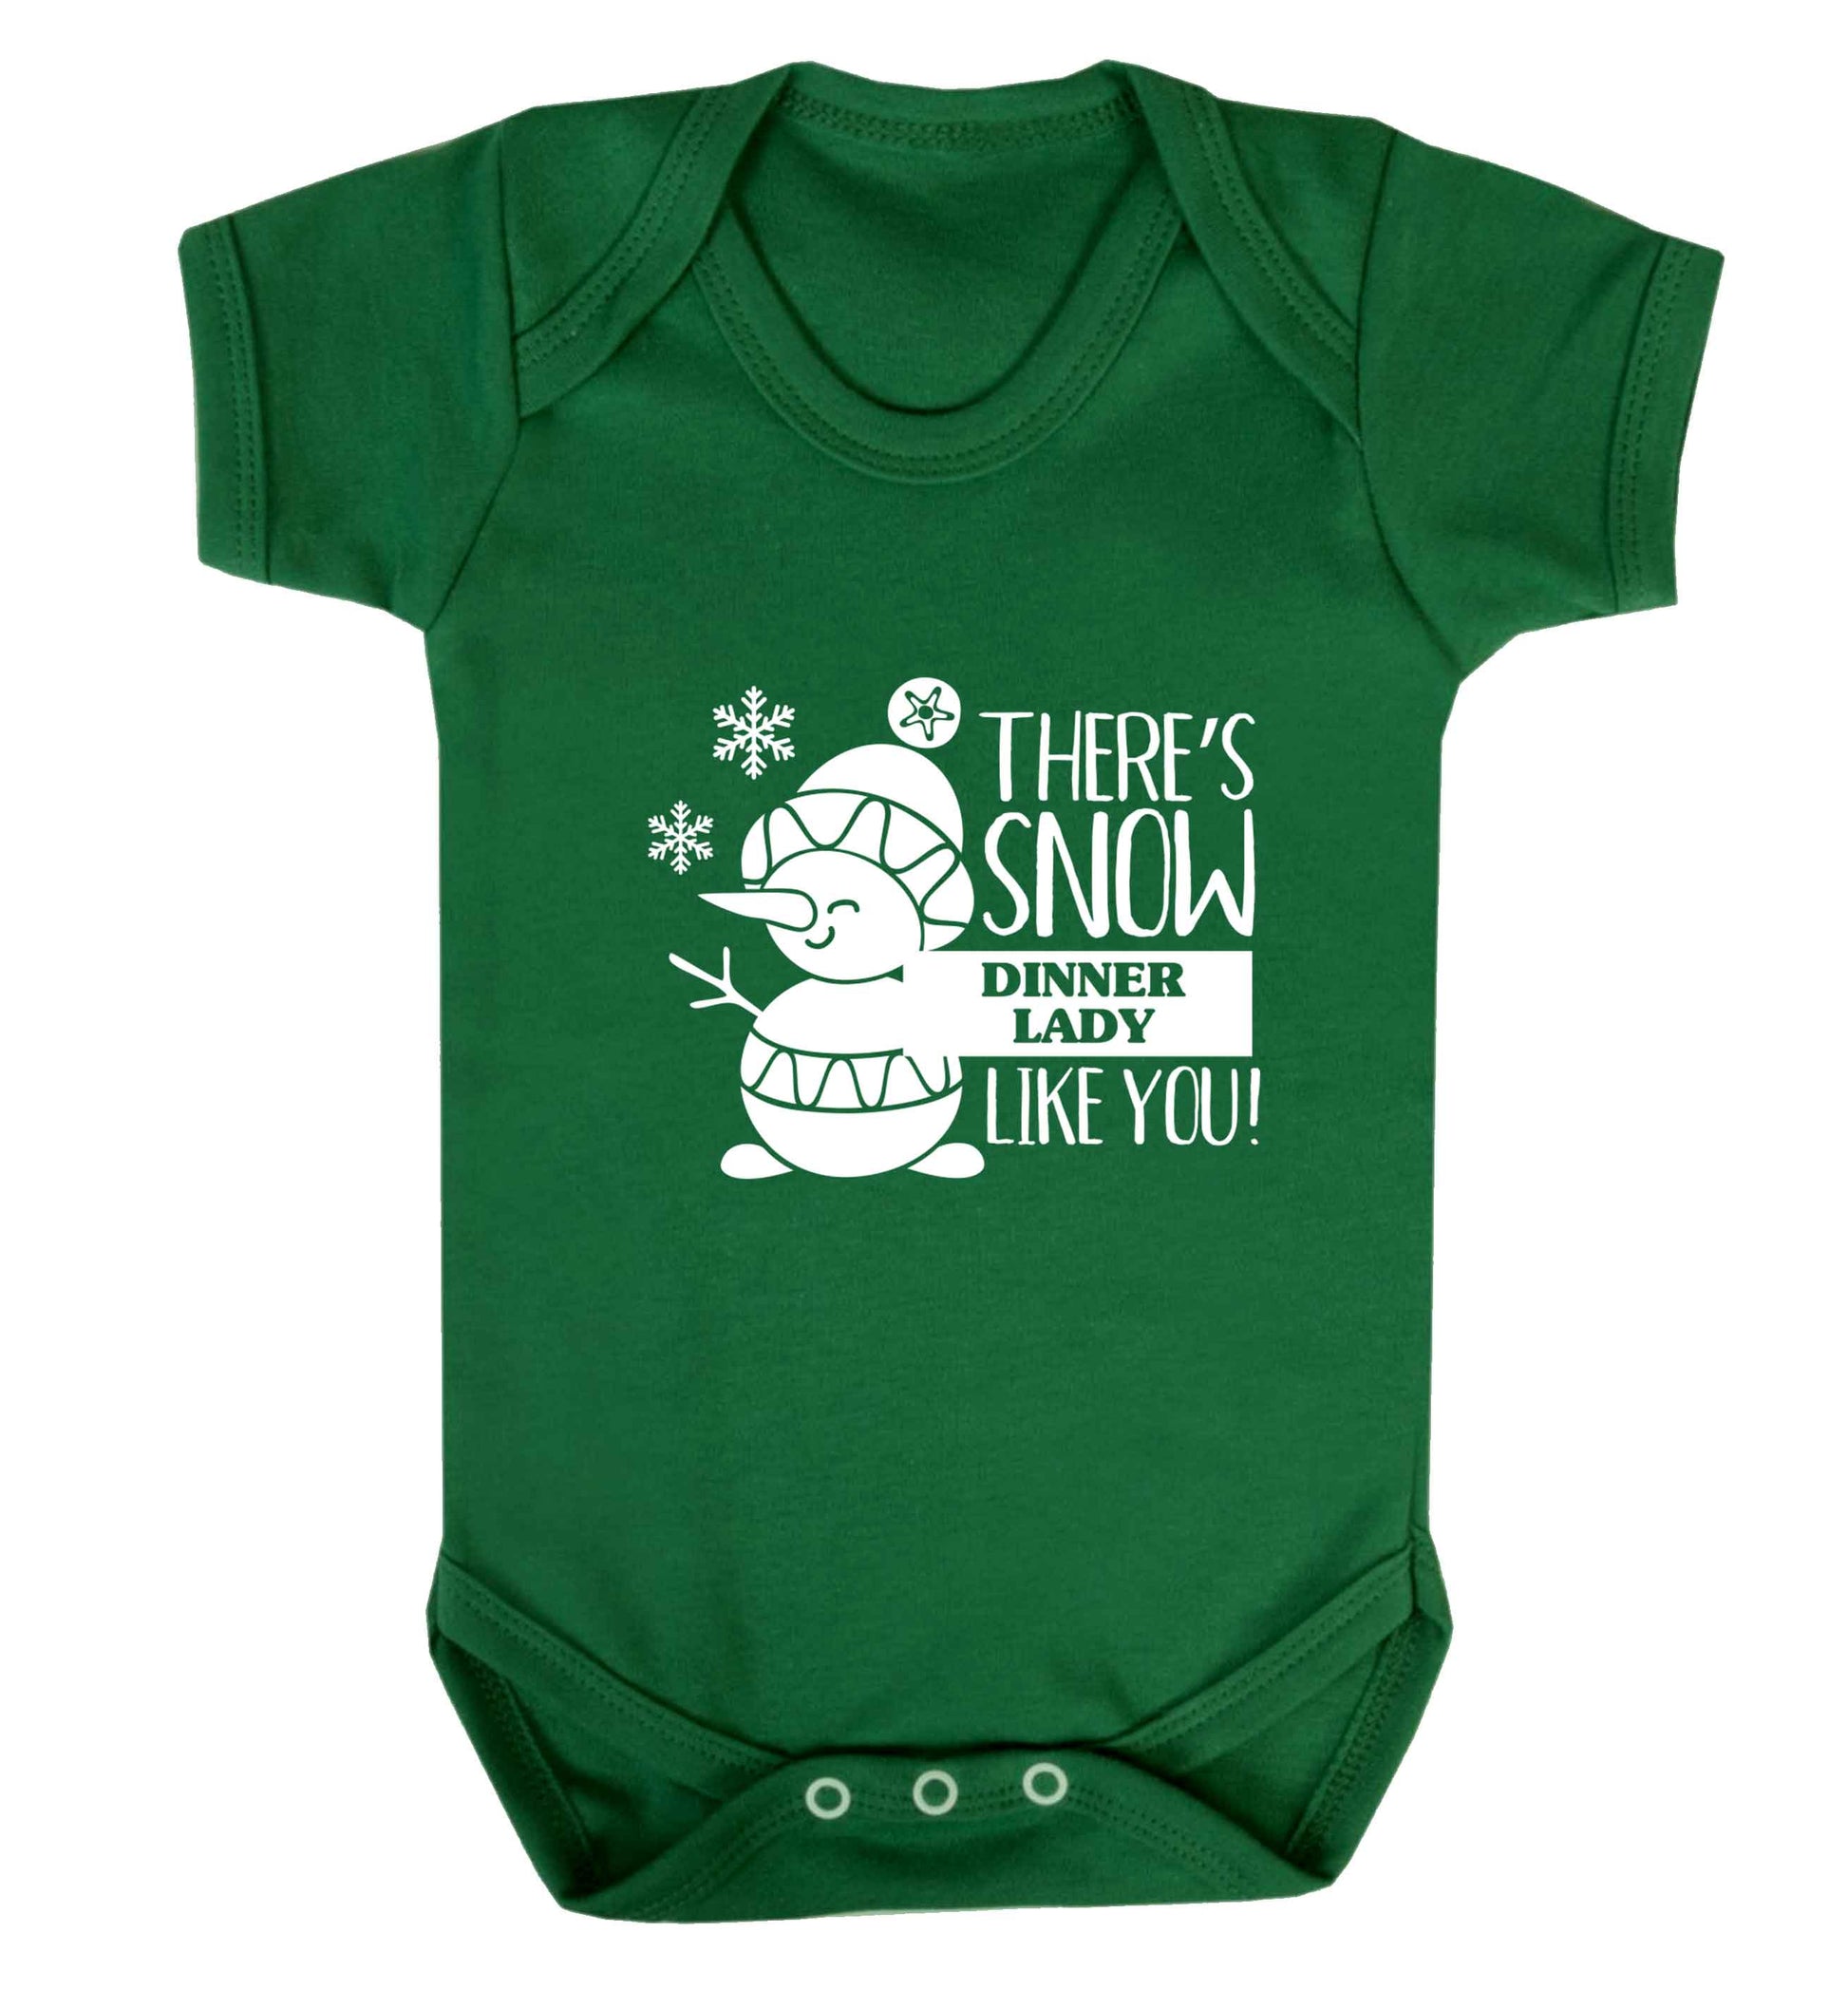 There's snow dinner lady like you baby vest green 18-24 months